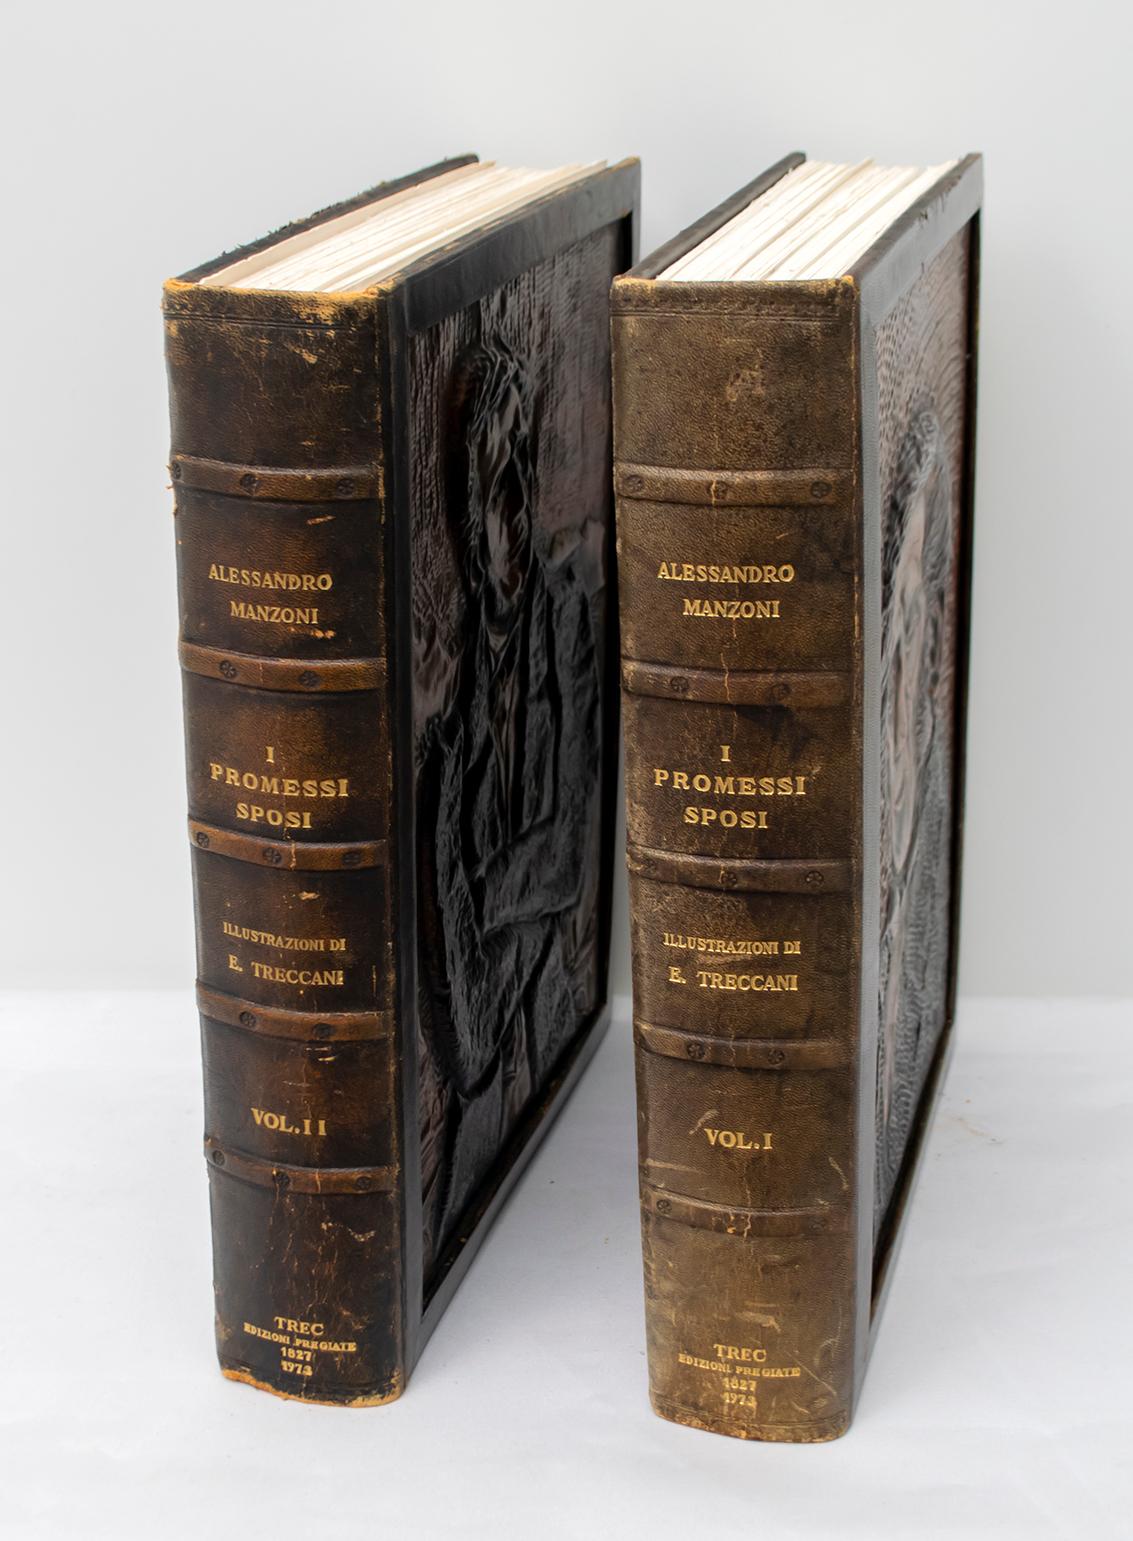 I Promessi Sposi by Alessandro Manzoni - Treccani edition of 1973.
Superb two-volume edition bound in leather, embossed copper cover, work by the sculptor Bronislav Lucovic. The printing was done by the Vatican Polyglot Typography on handmade paper